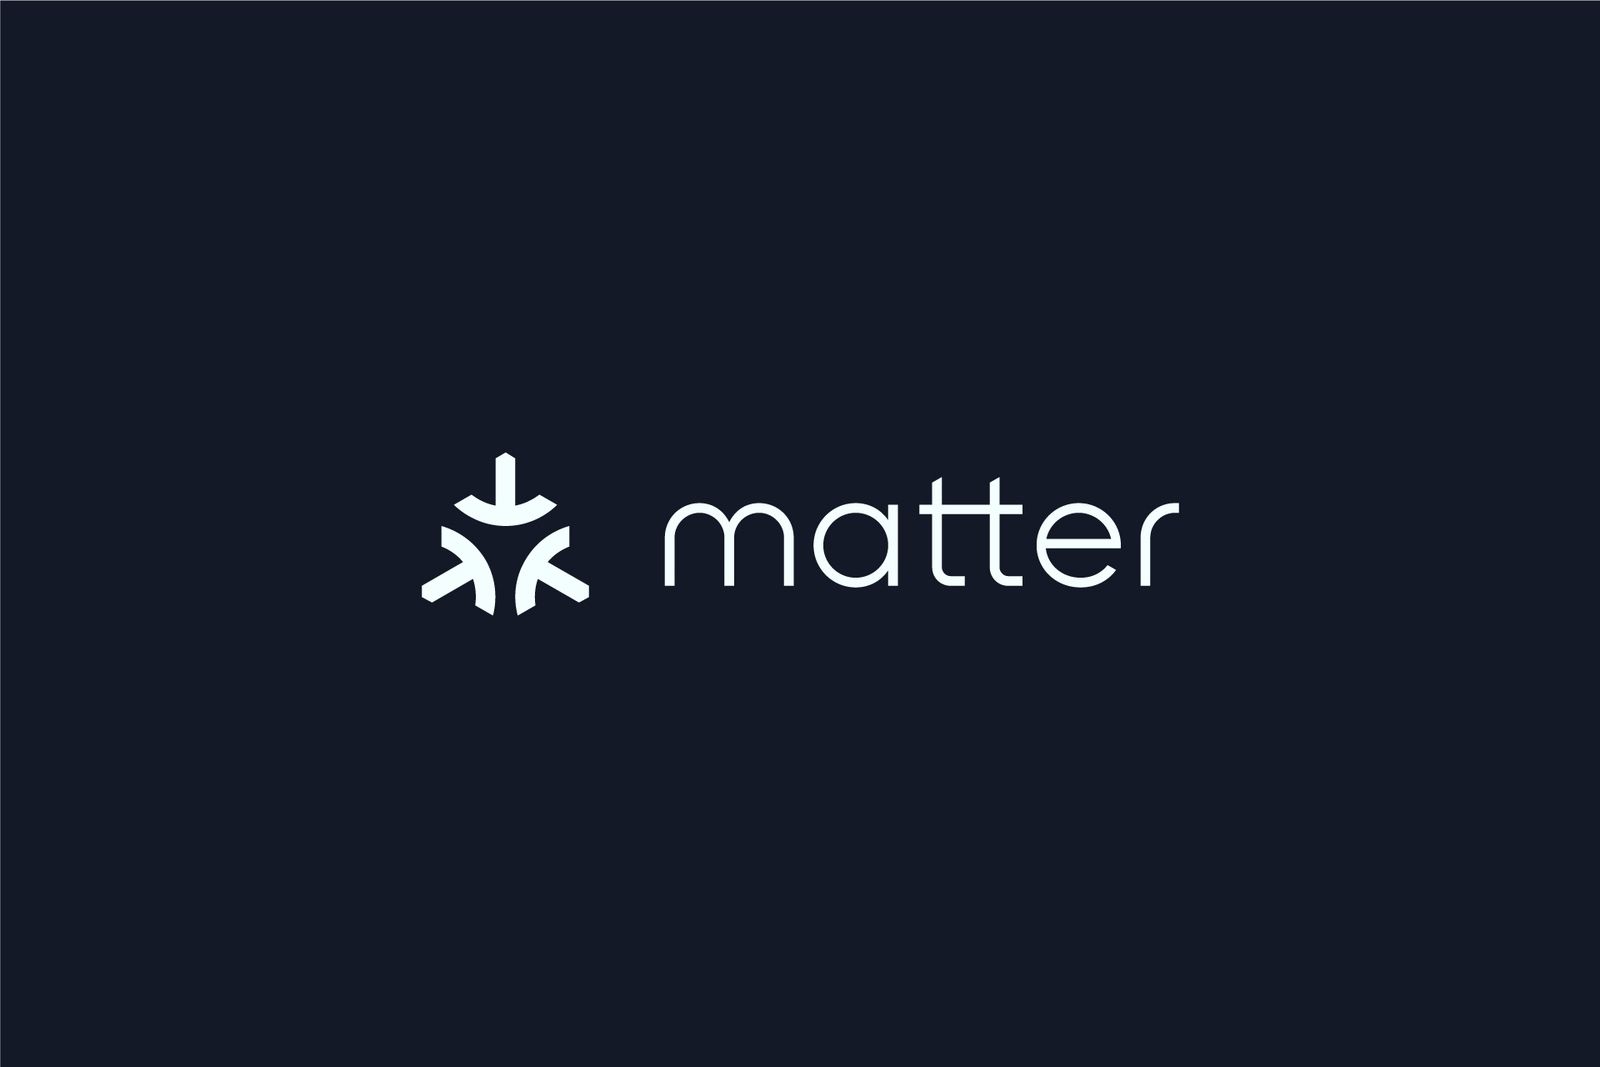 Project CHIP is now known as Matter - the latest standard aiming to simplify the smart home photo 1